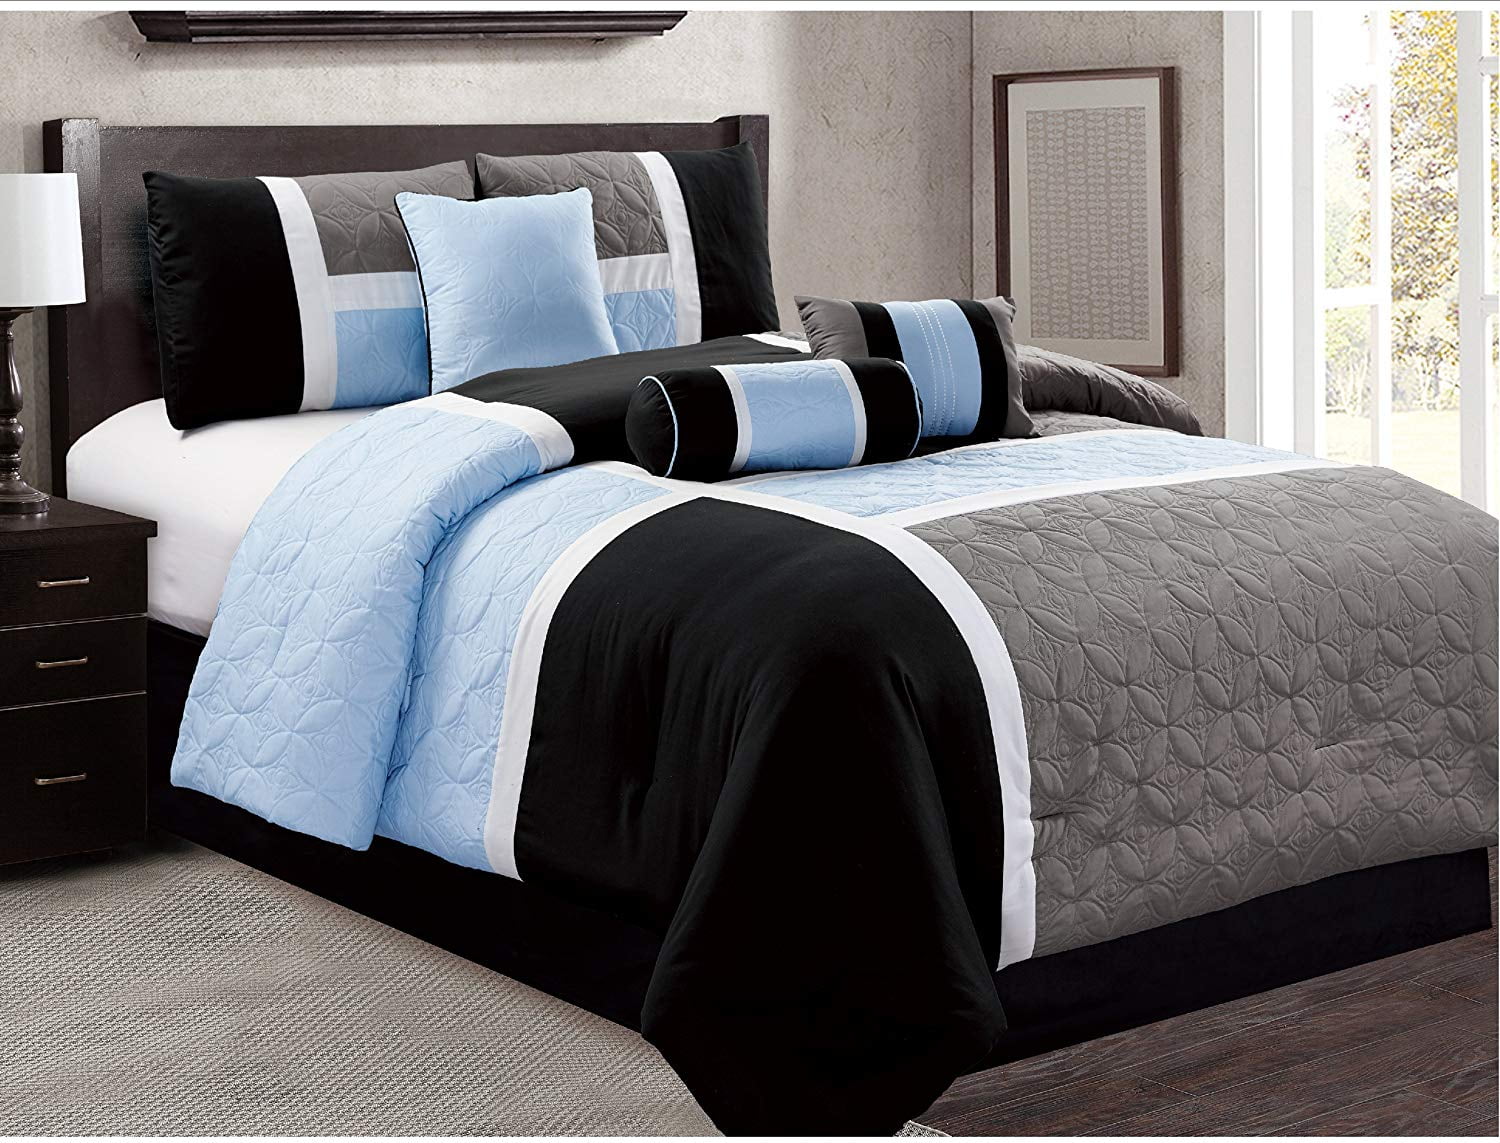 7 Piece Luxury Soft Microfiber Quilted Patchwork Comforter Set Black Cal King 